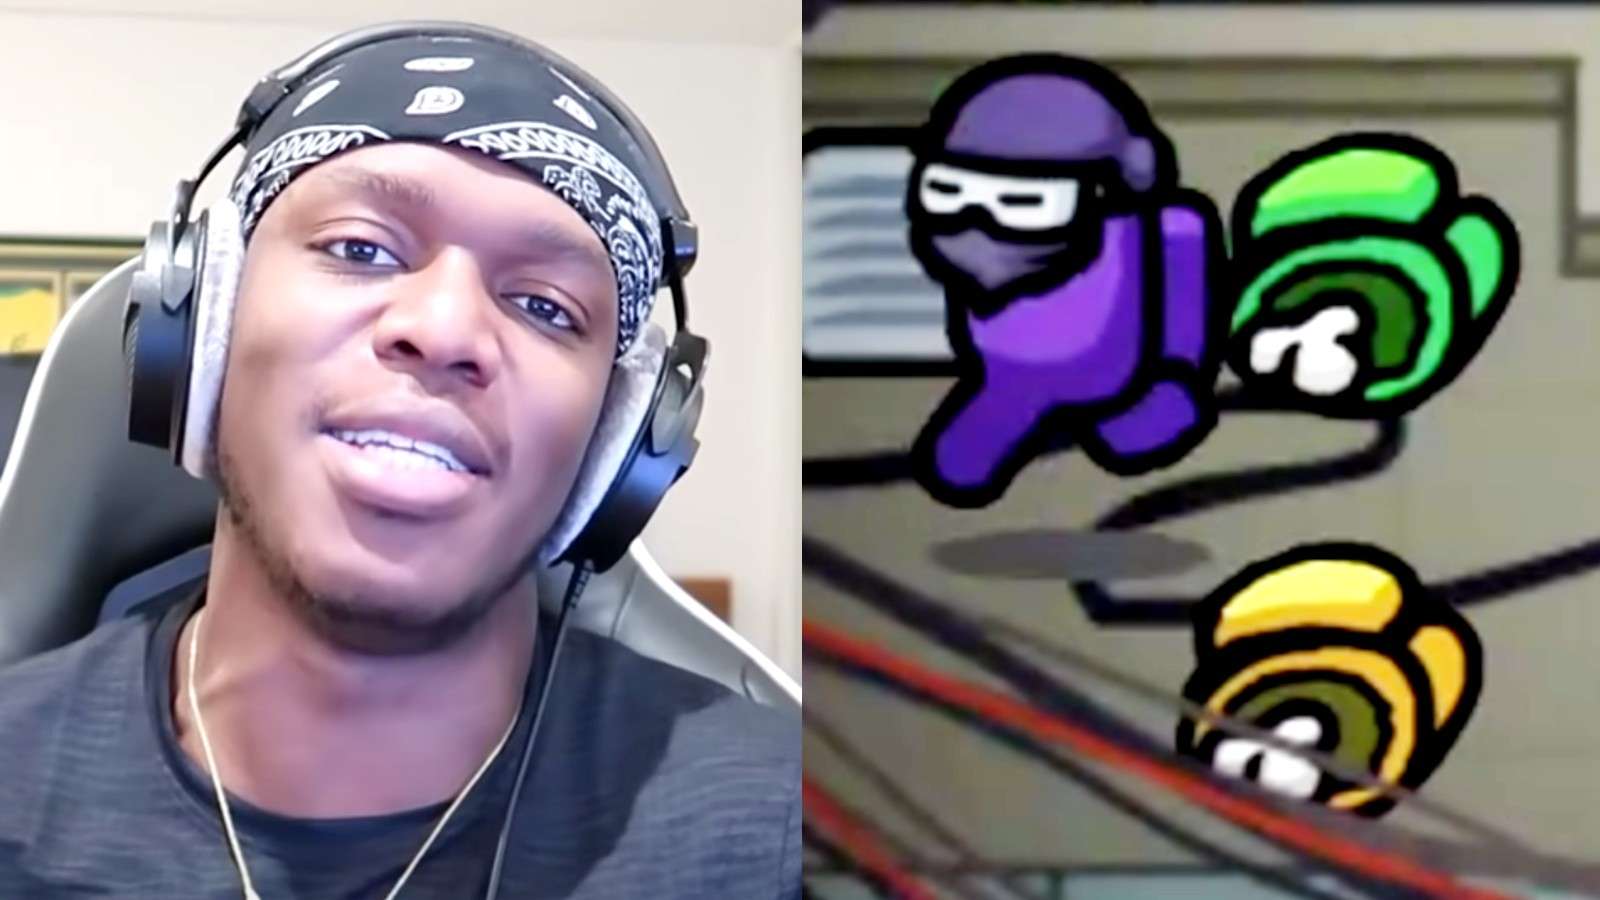 KSI in a YouTube video next to 3 Among Us characters